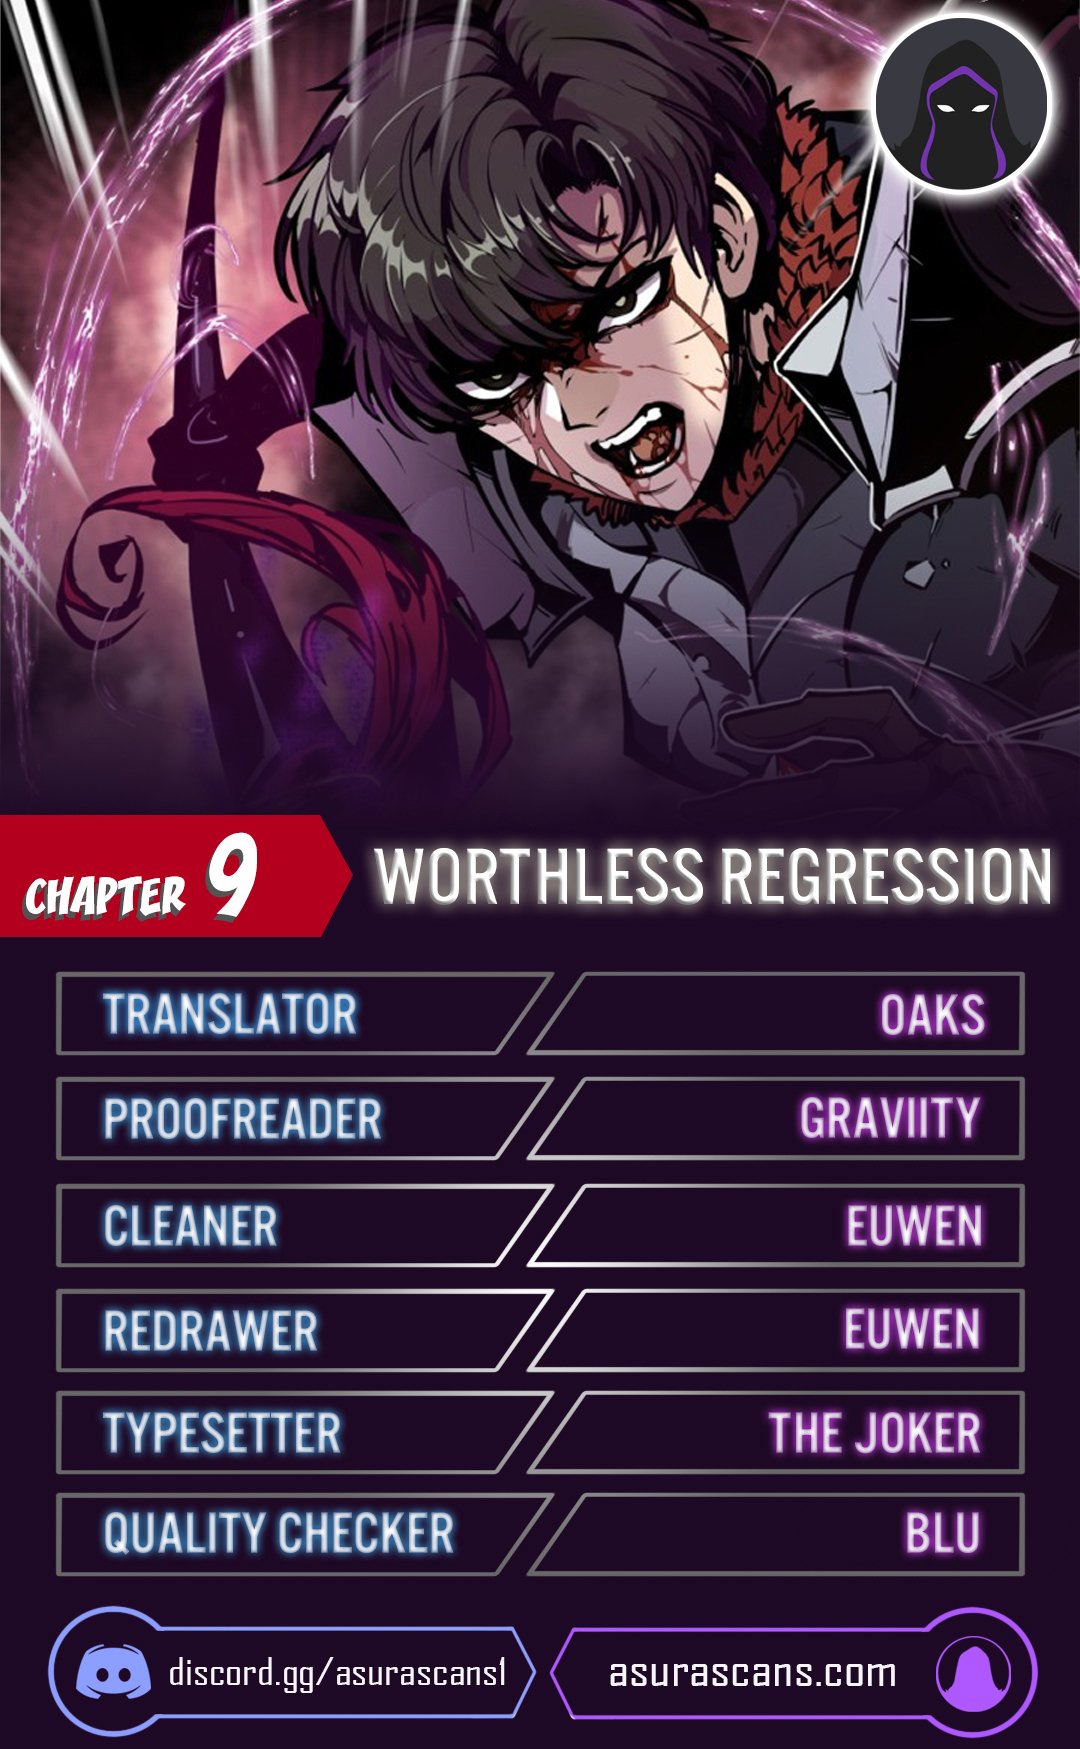 Worthless Regression - Chapter 20447 - Image 1